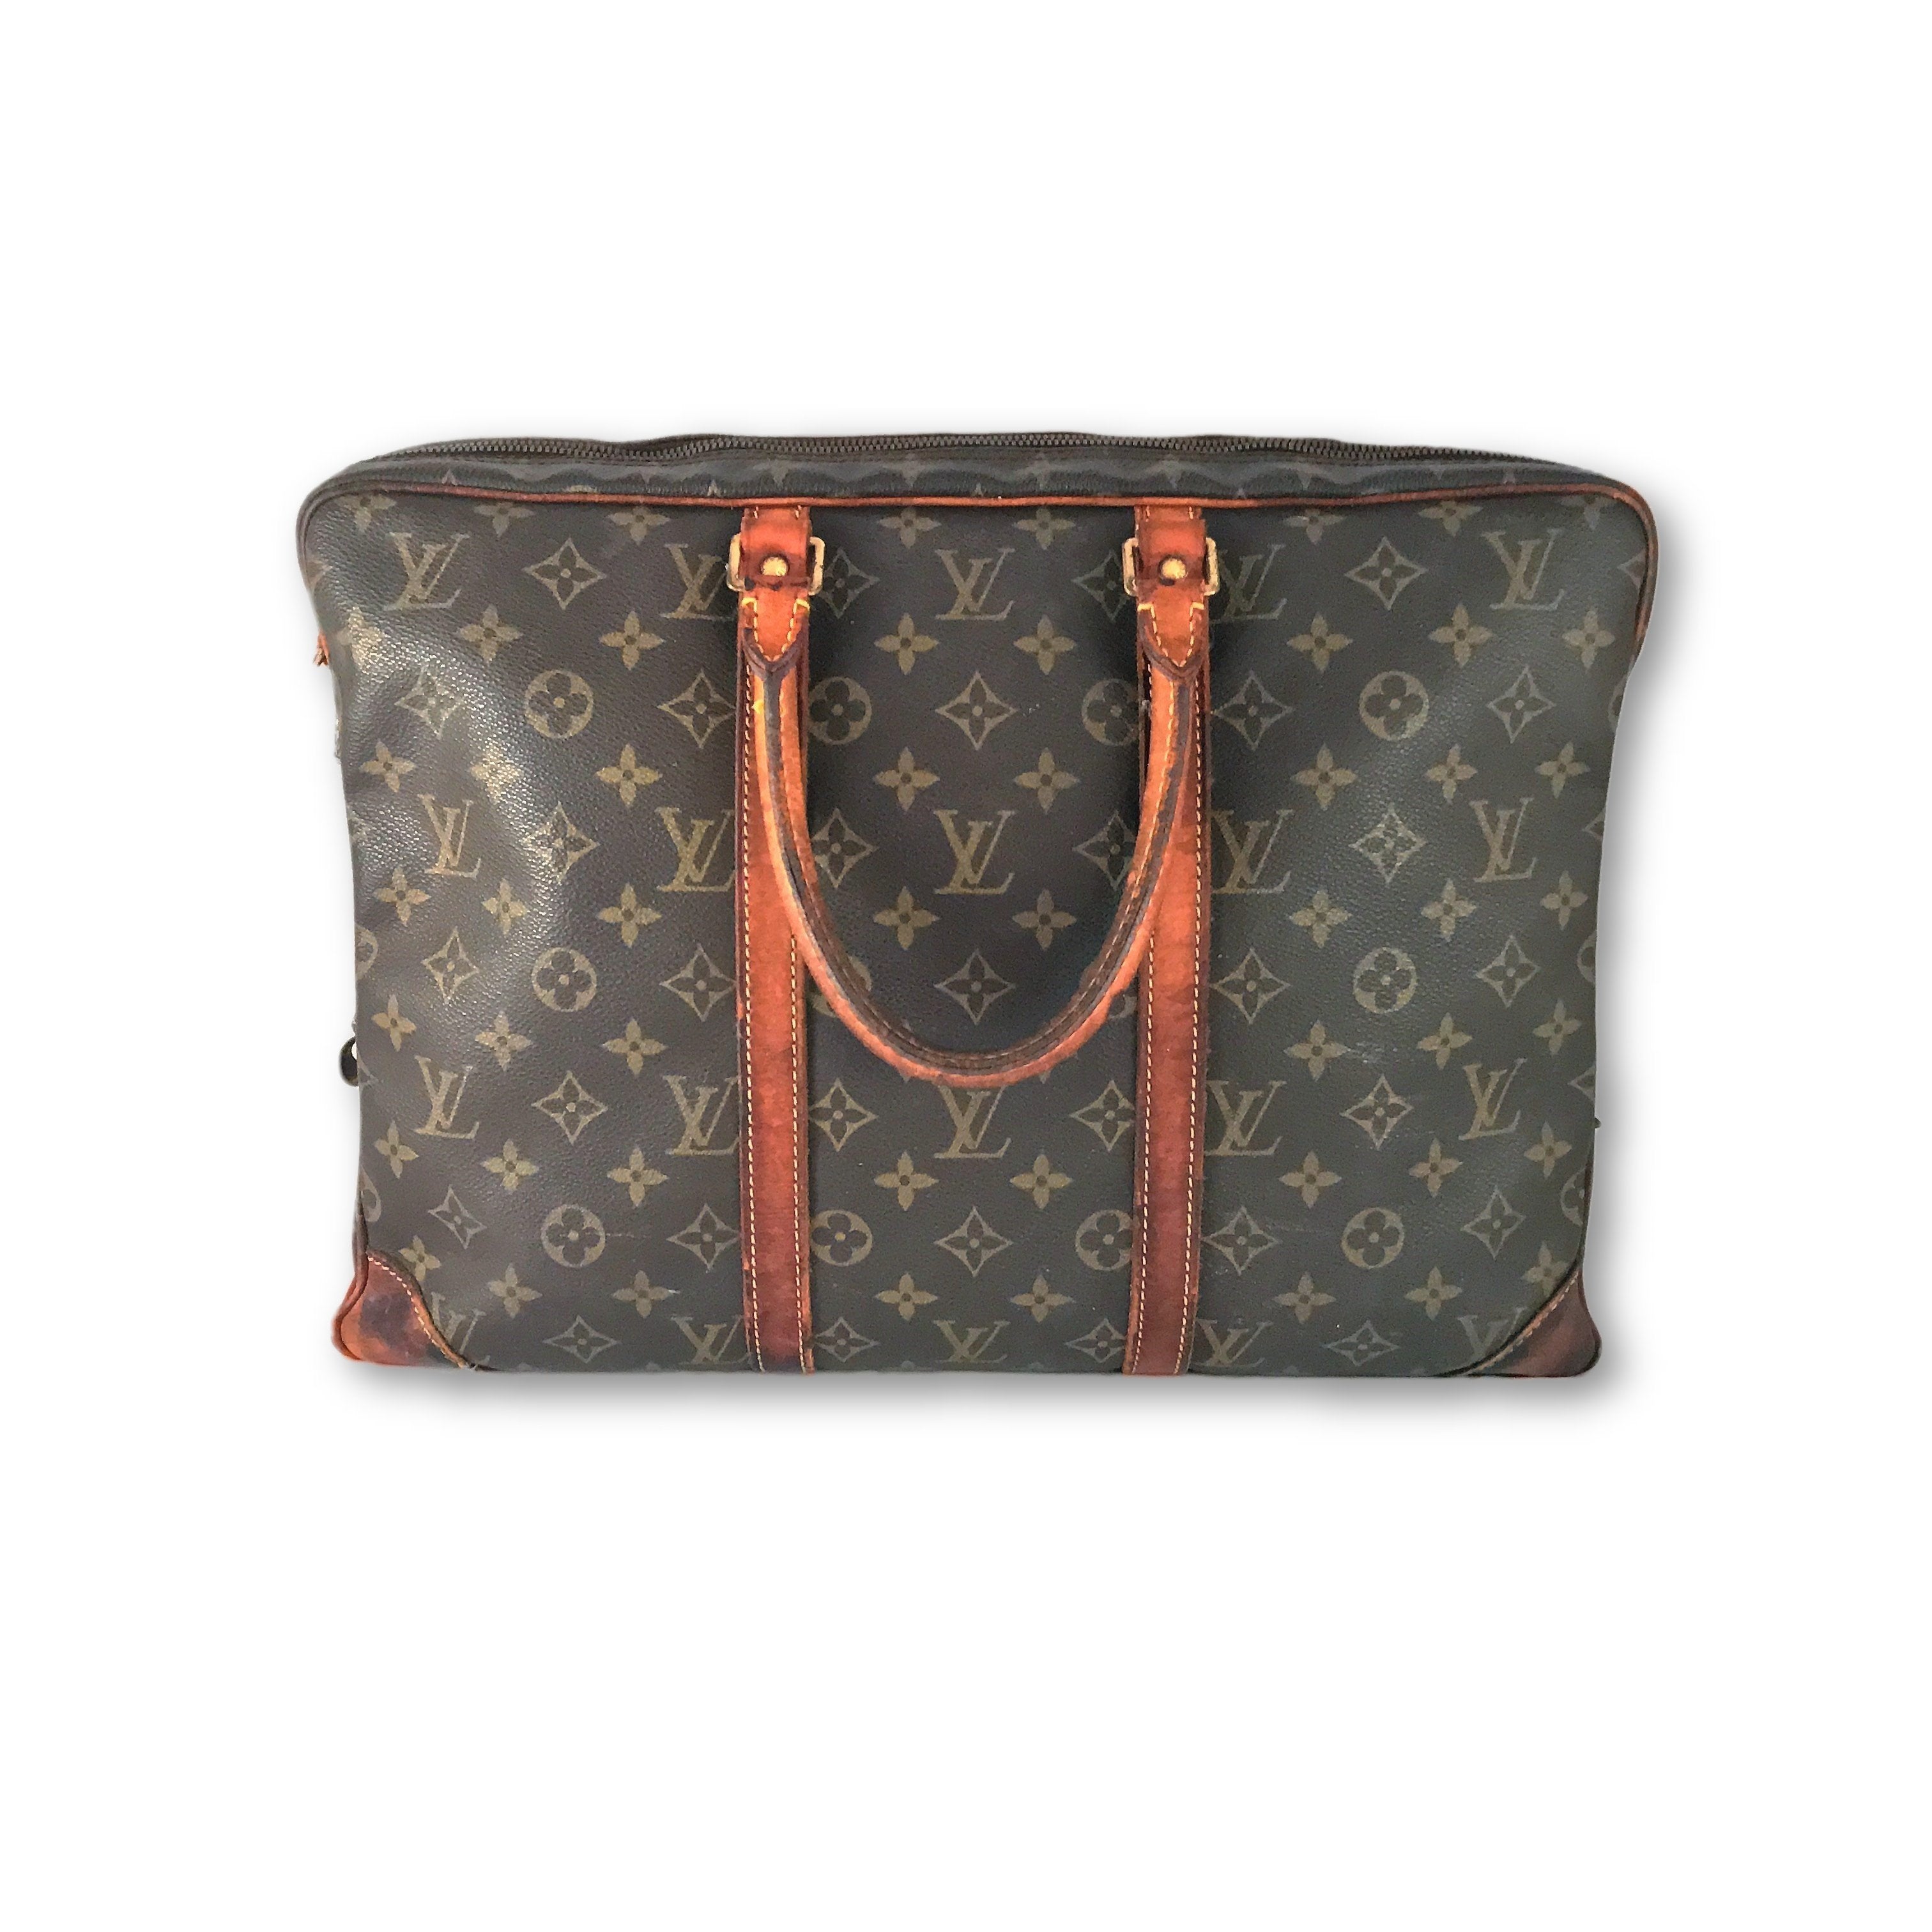 Louis Vuitton Laptop Bag With Pocket. All Original Boxing Included